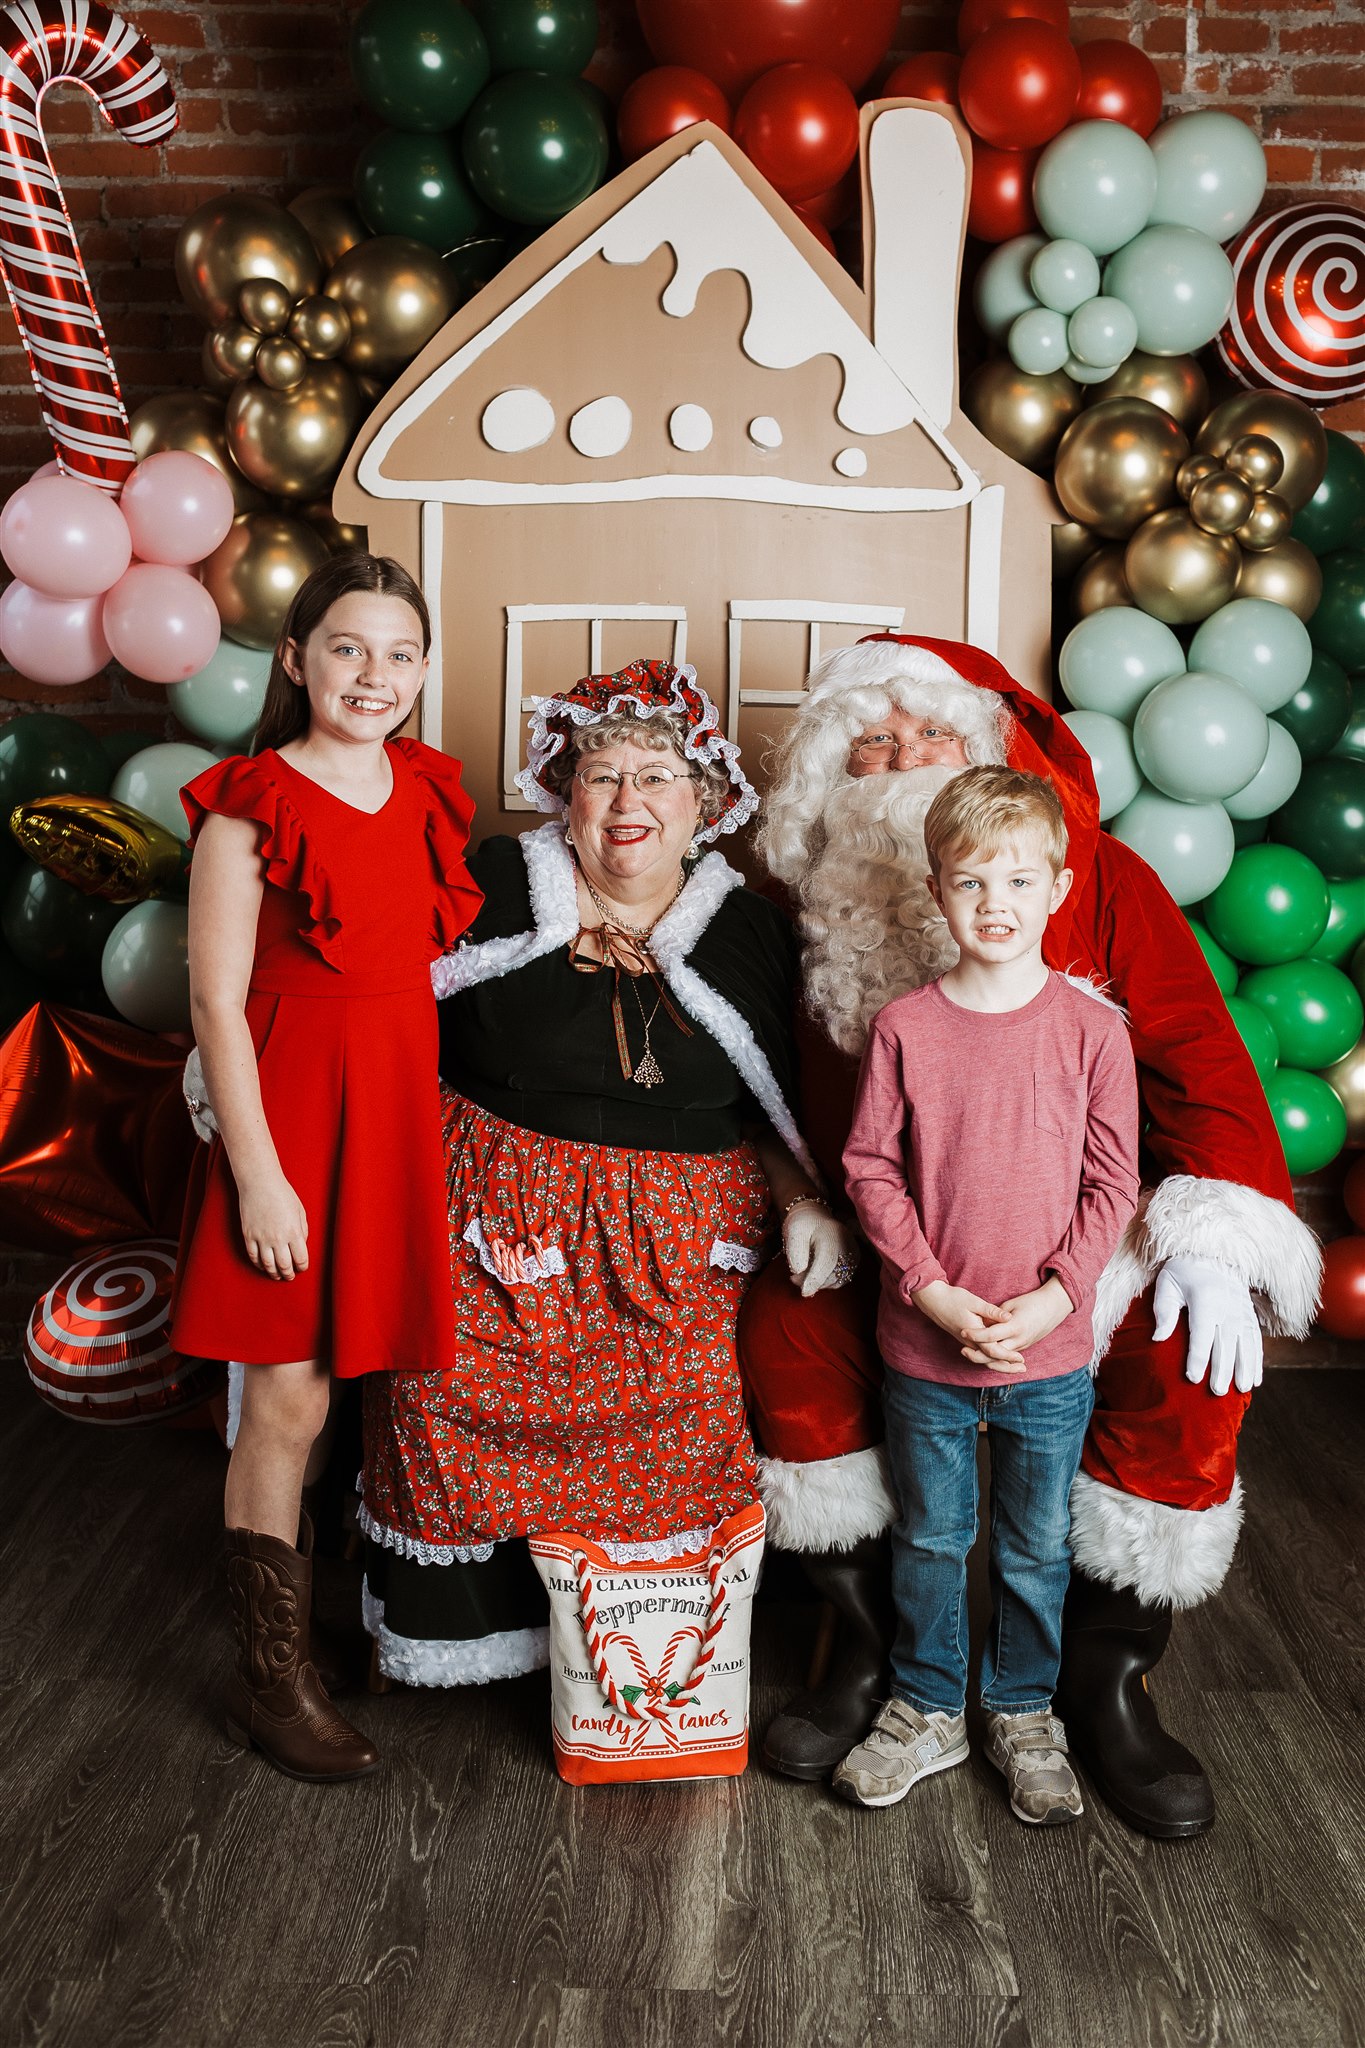 FREE DIGITAL DOWNLOAD - Donuts with Santa - St. Louis Mom